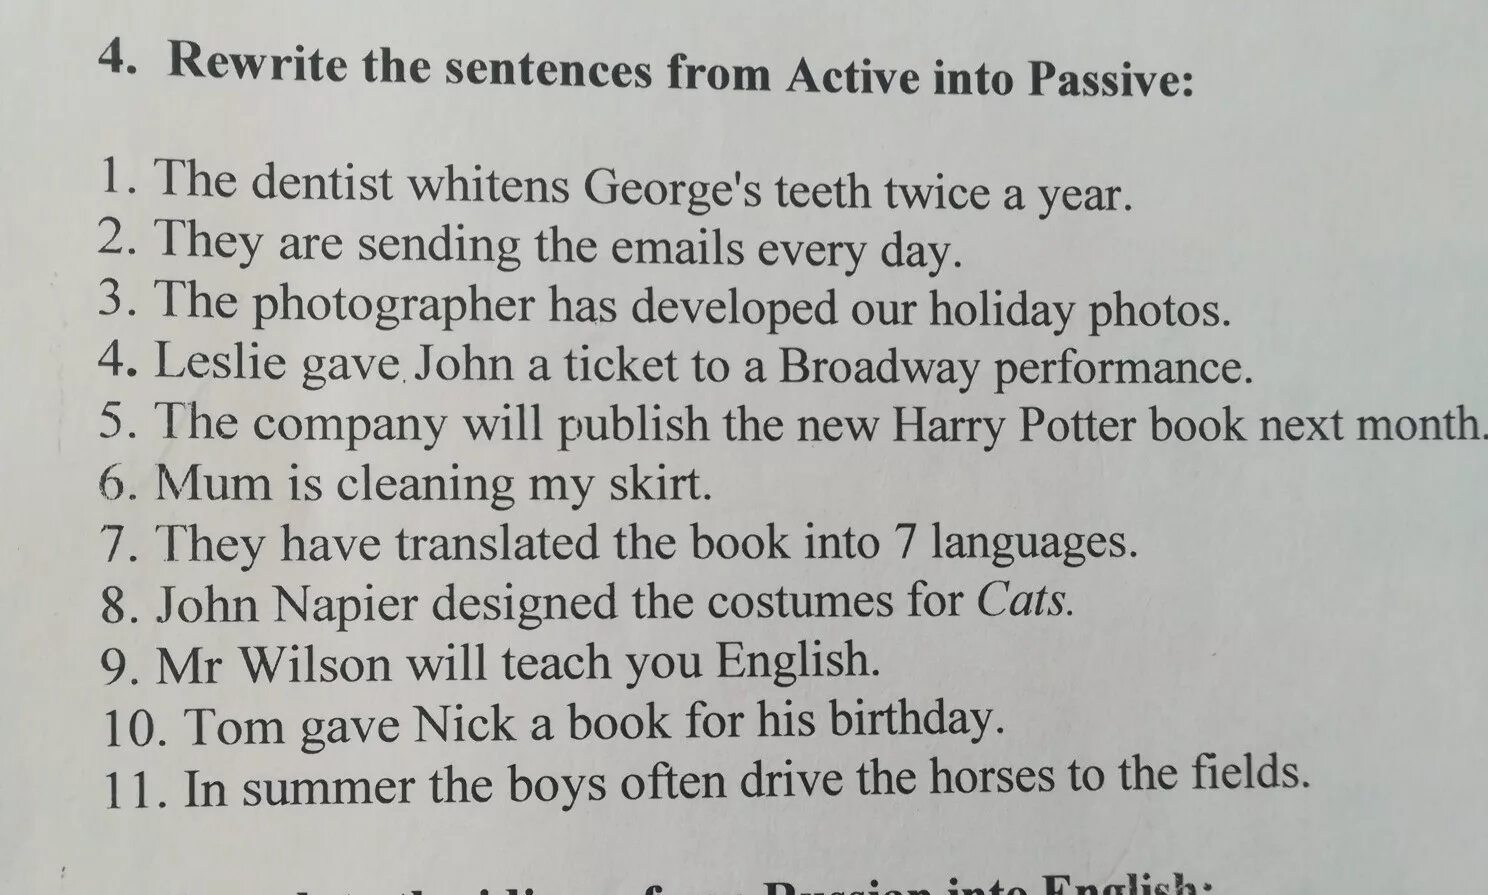 Rewrite the sentences in the active. Rewrite the sentences in the Passive. Rewrite the Active sentences in the Passive. Rewrite the sentences in the Passive Voice. Put the sentences into Passive Voice.